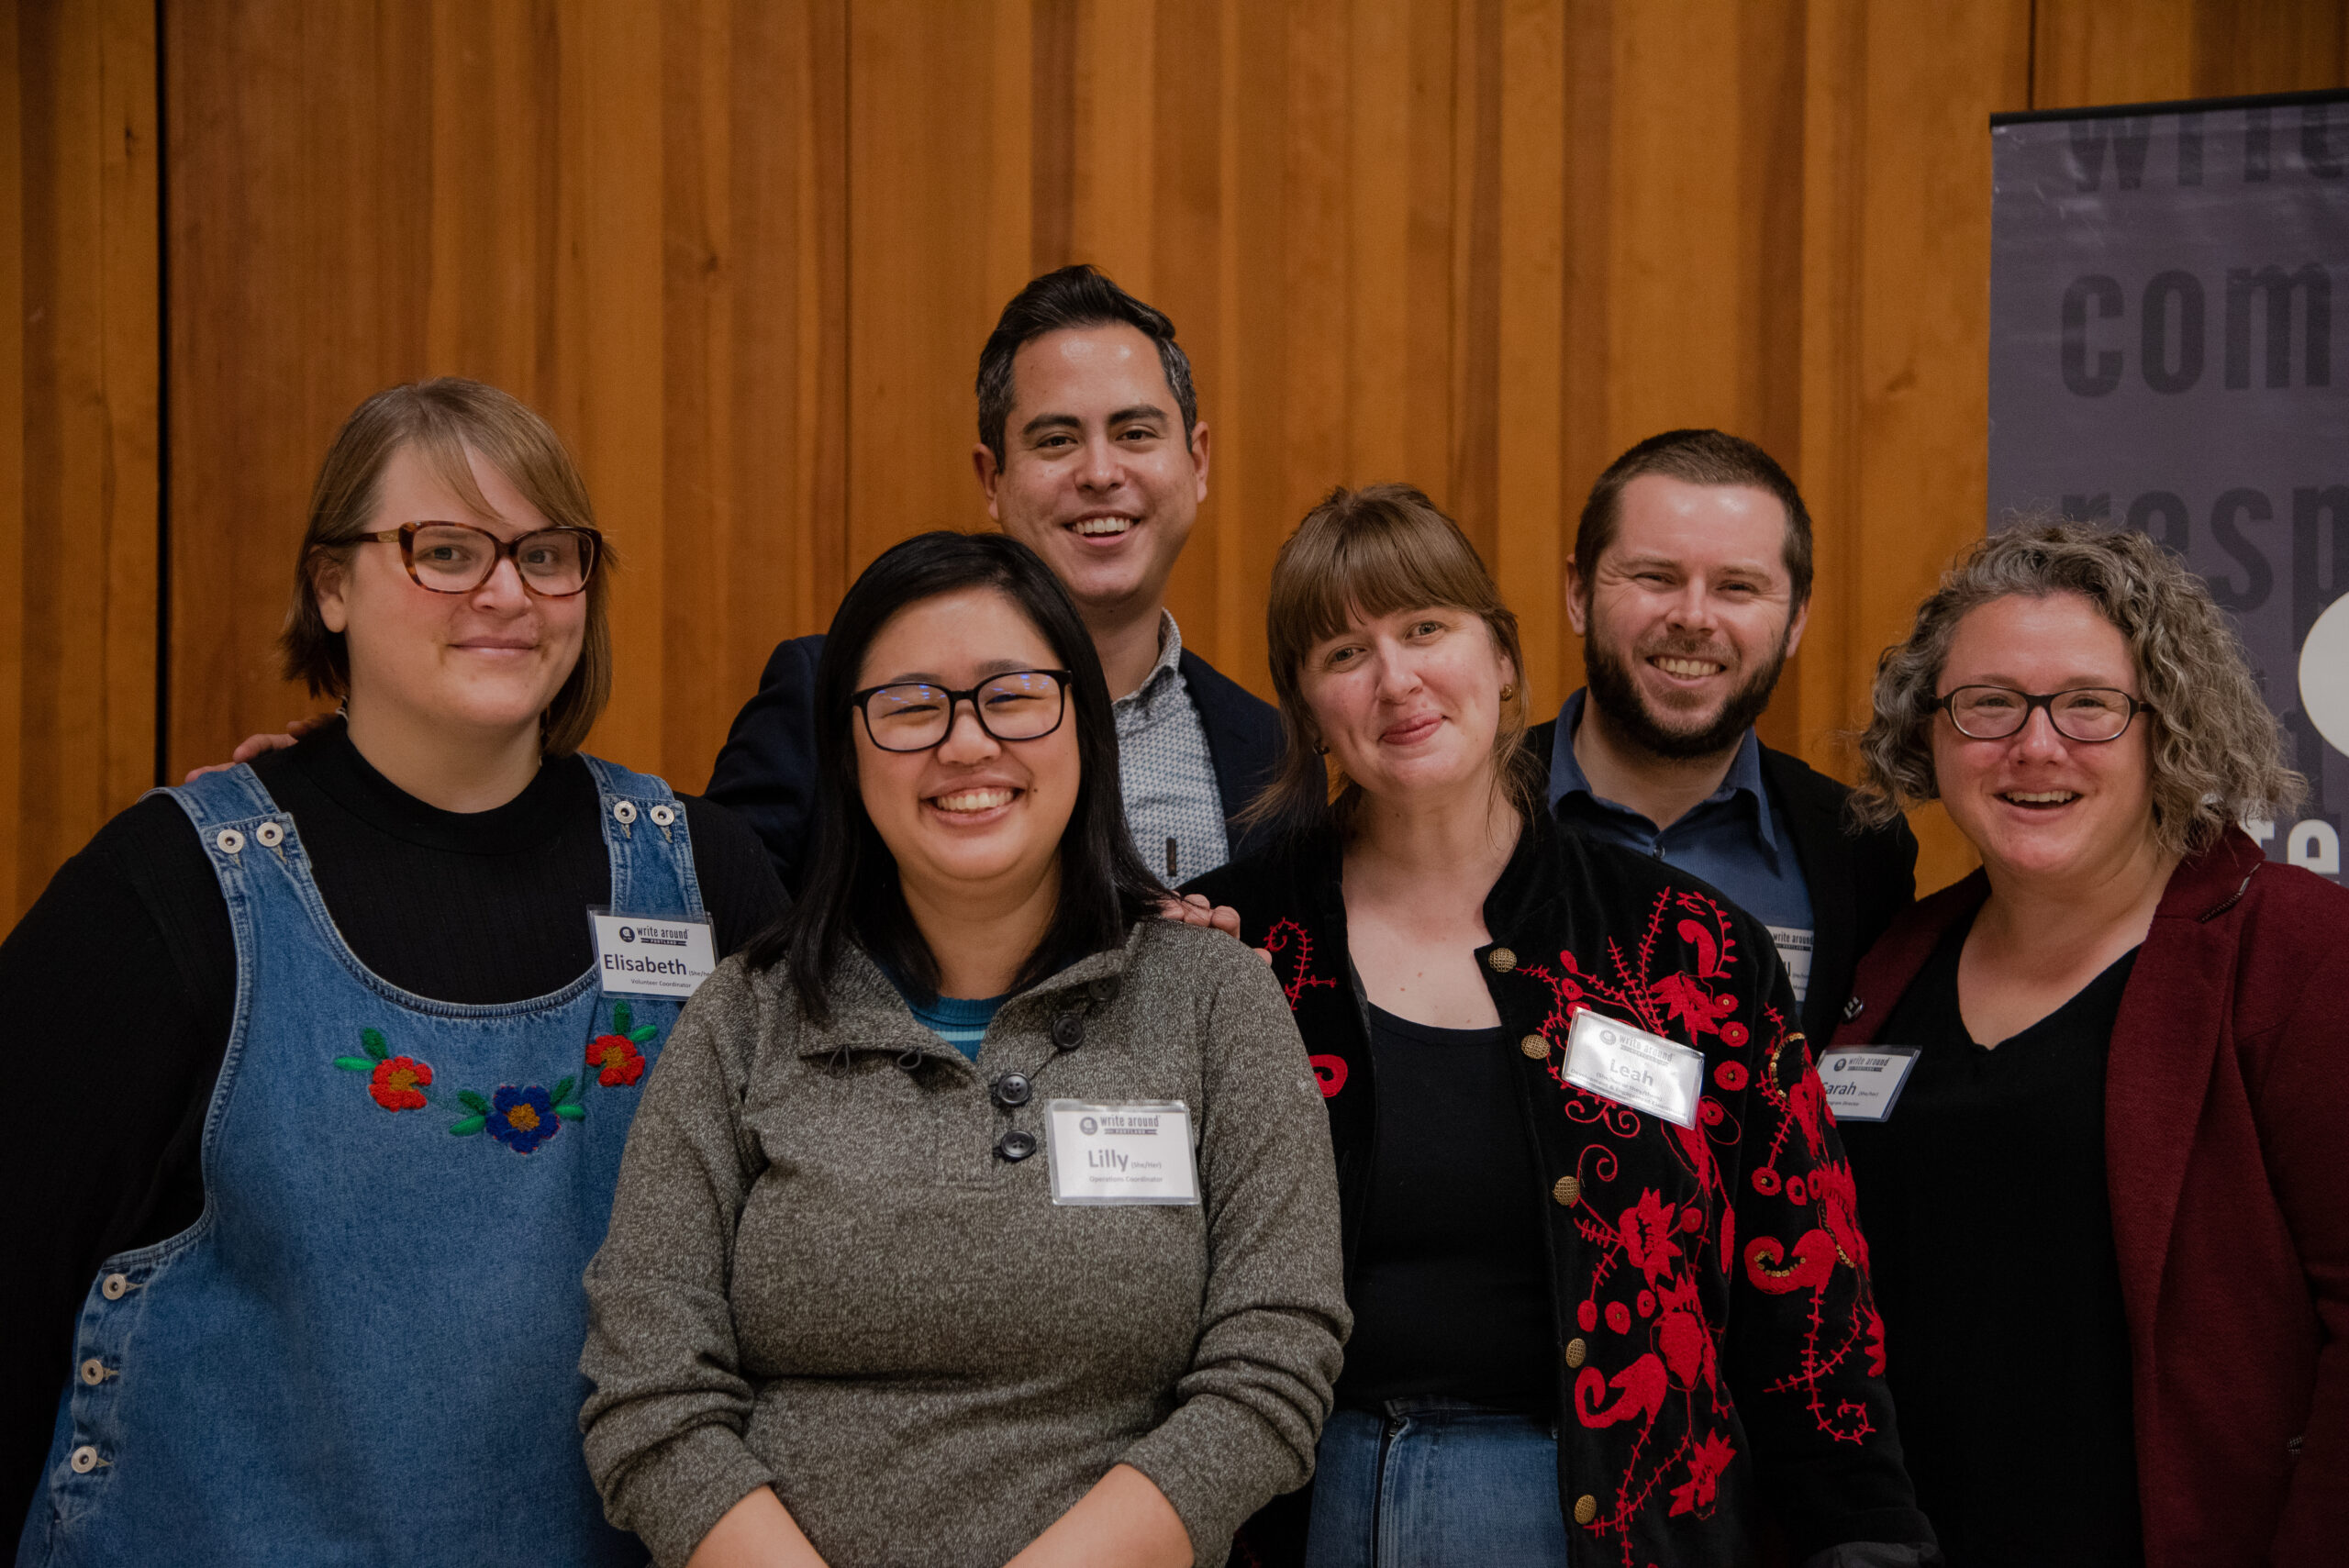 A group of Write Around Portland staff members pose together in front of a honey-colored wooden wall.